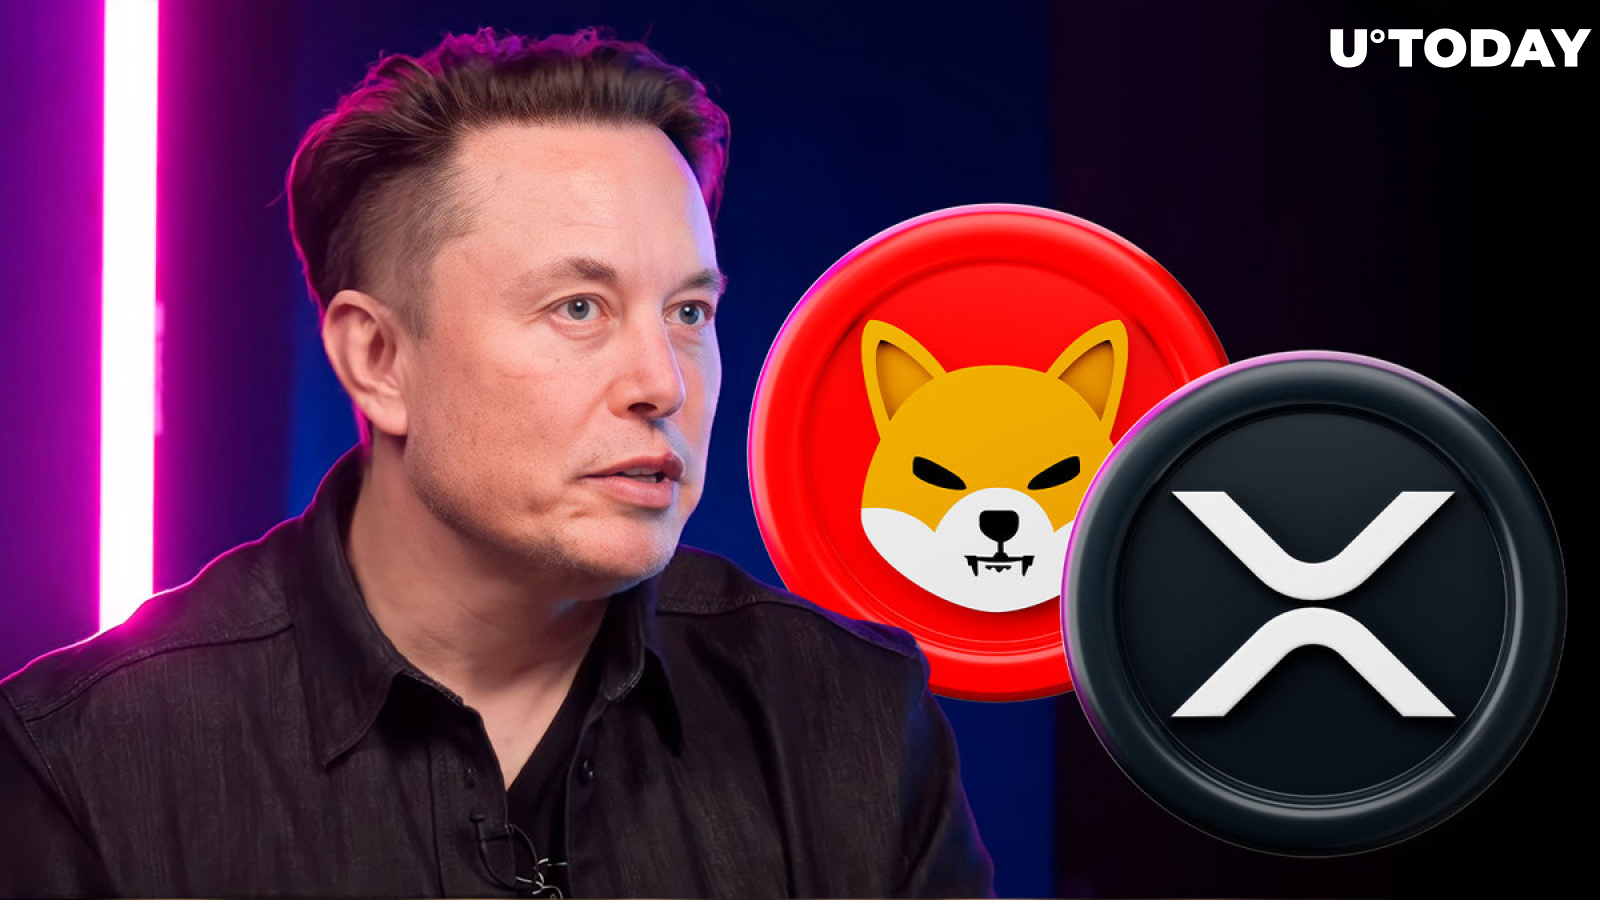 Elon Musk's New Cryptic Tweet Triggers Hot Response From XRP and SHIB Lovers